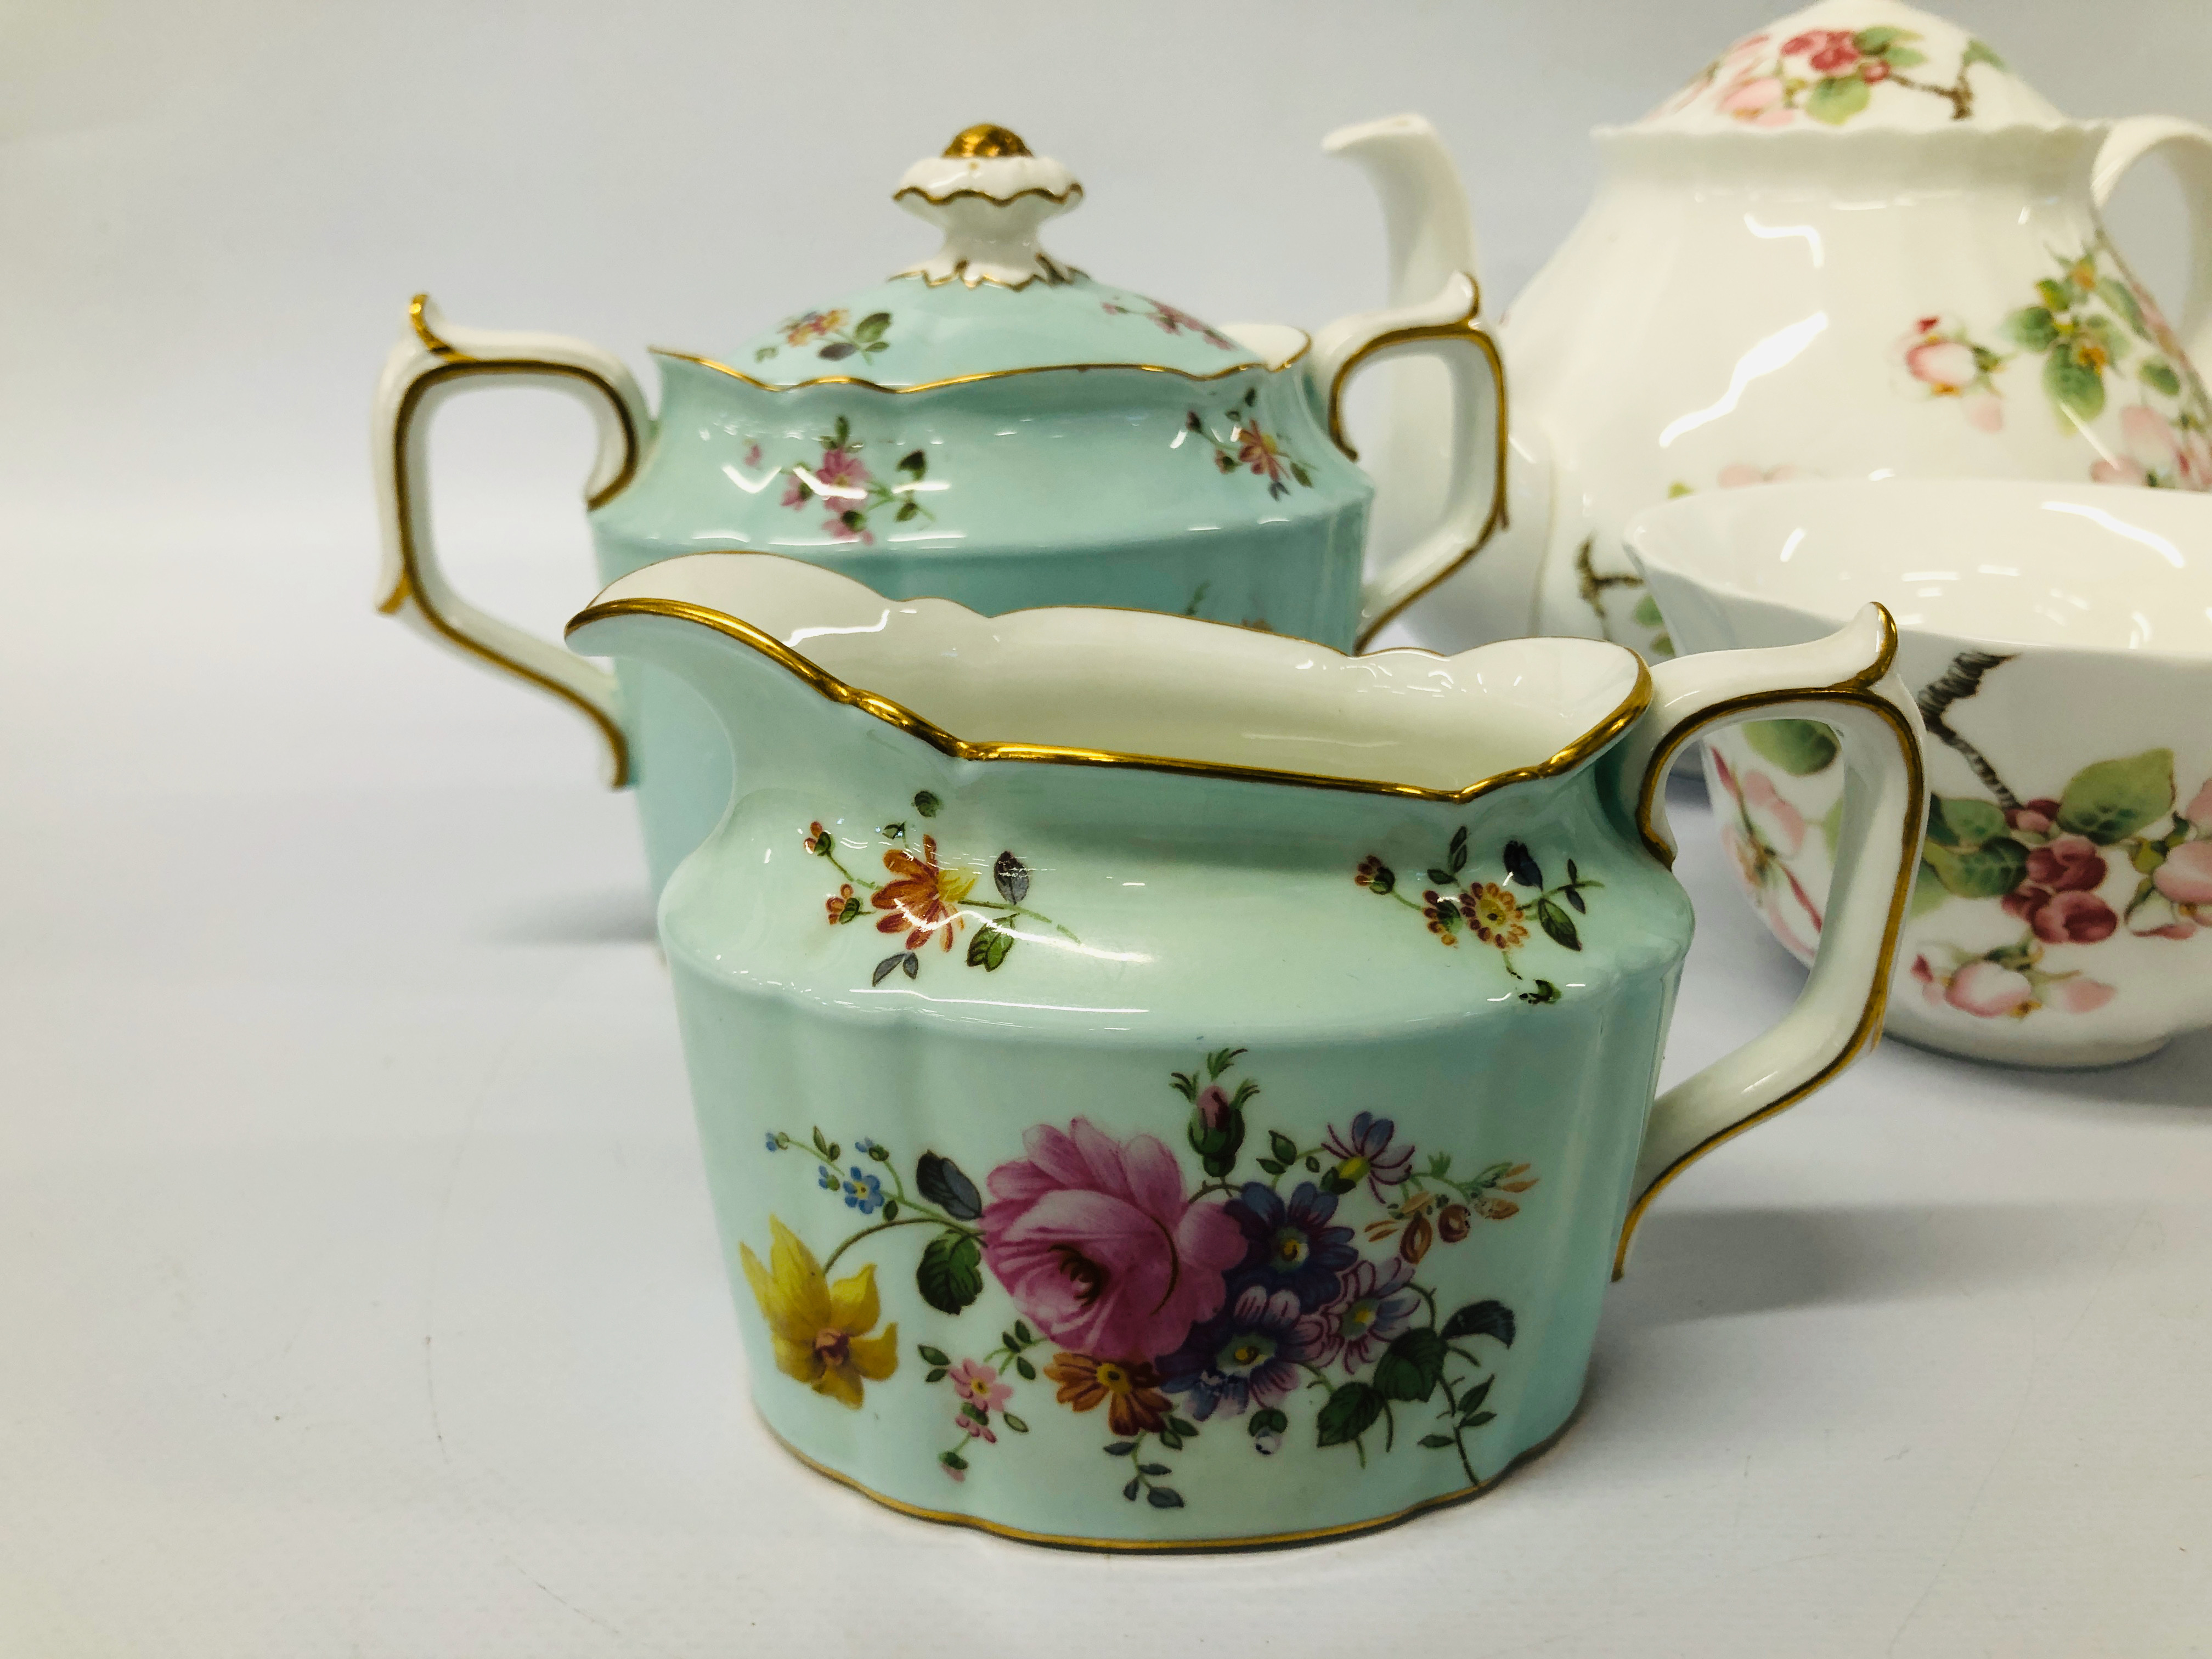 9 PIECES OF ROYAL CROWN DERBY "POSIES" (7 SIDE PLATES ONE HAVING SMALL CHIP AND SCRATCH, CREAM JUG, - Image 6 of 18